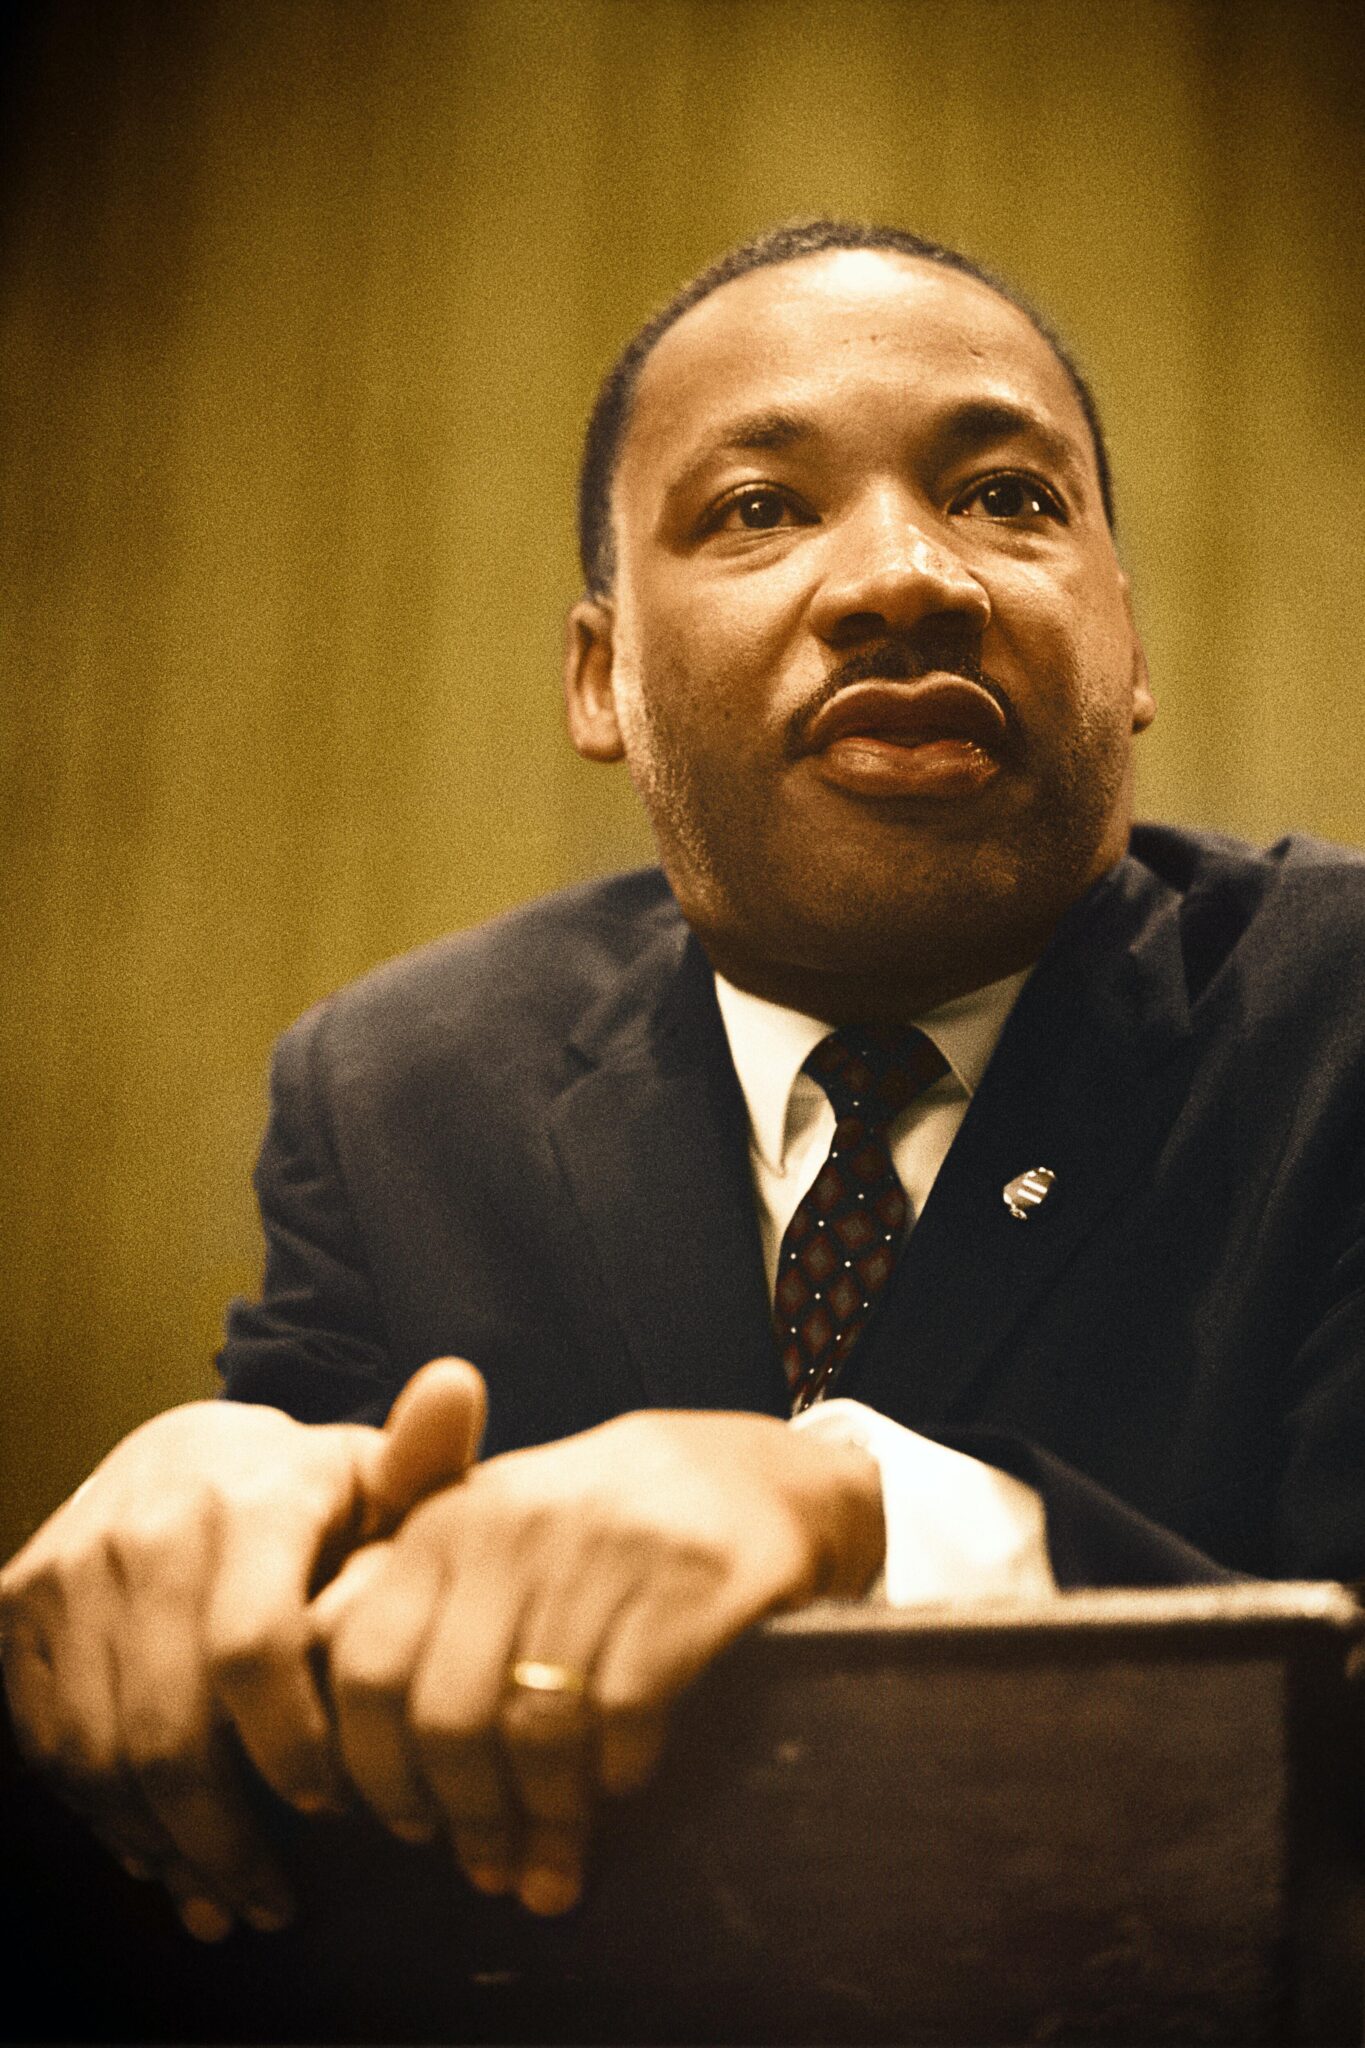 i-have-a-dream-speech-one-of-many-important-points-in-martin-luther-king-s-life-local-histories